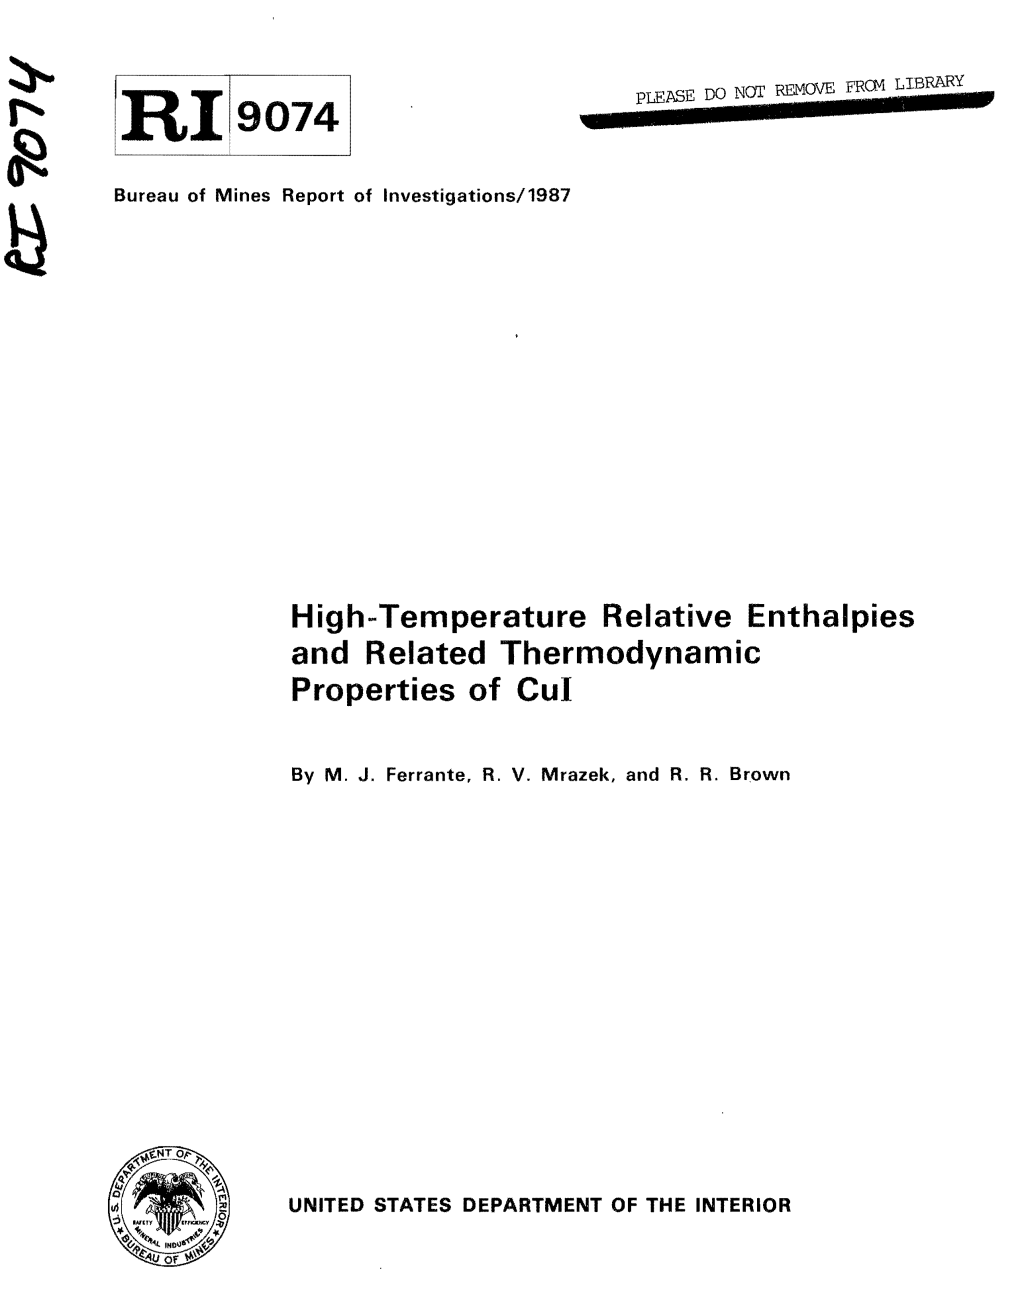 High-Temperature Relative Enthalpies and Related Thermodynamic Properties of Cui